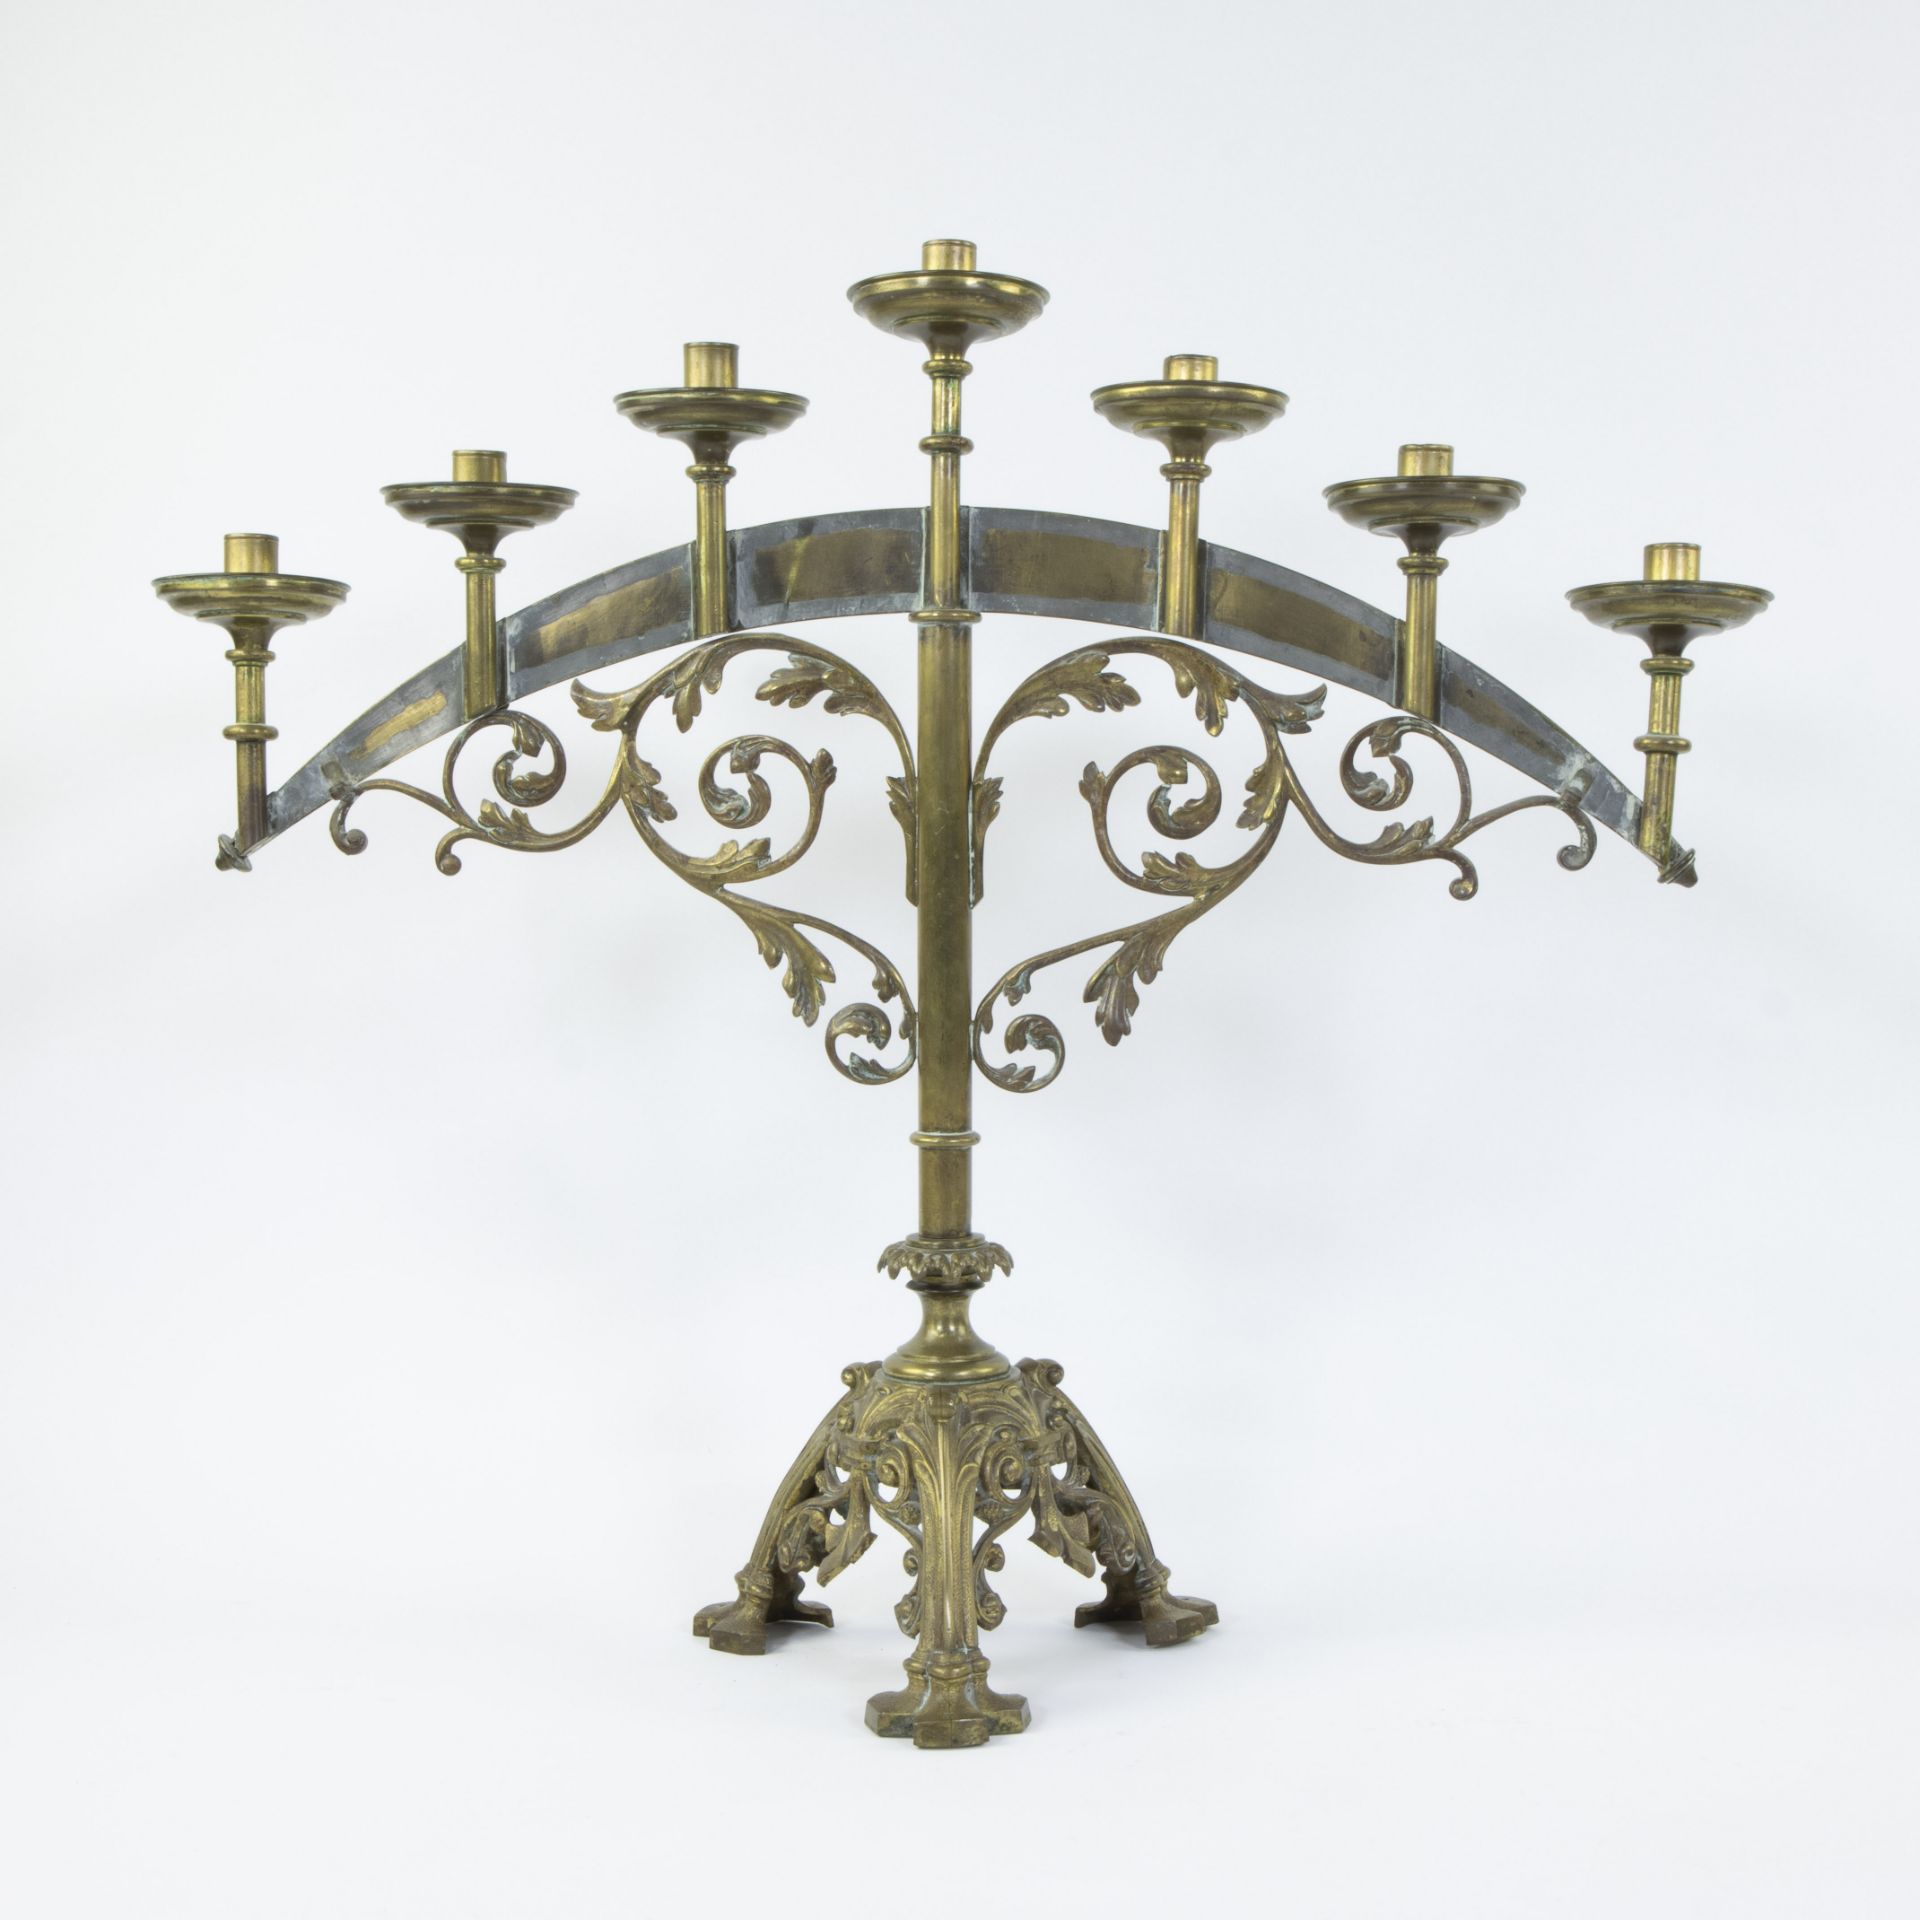 A semi-circle shape brass candle holder with seven branches, magnifying glass and framed relic - Image 2 of 3